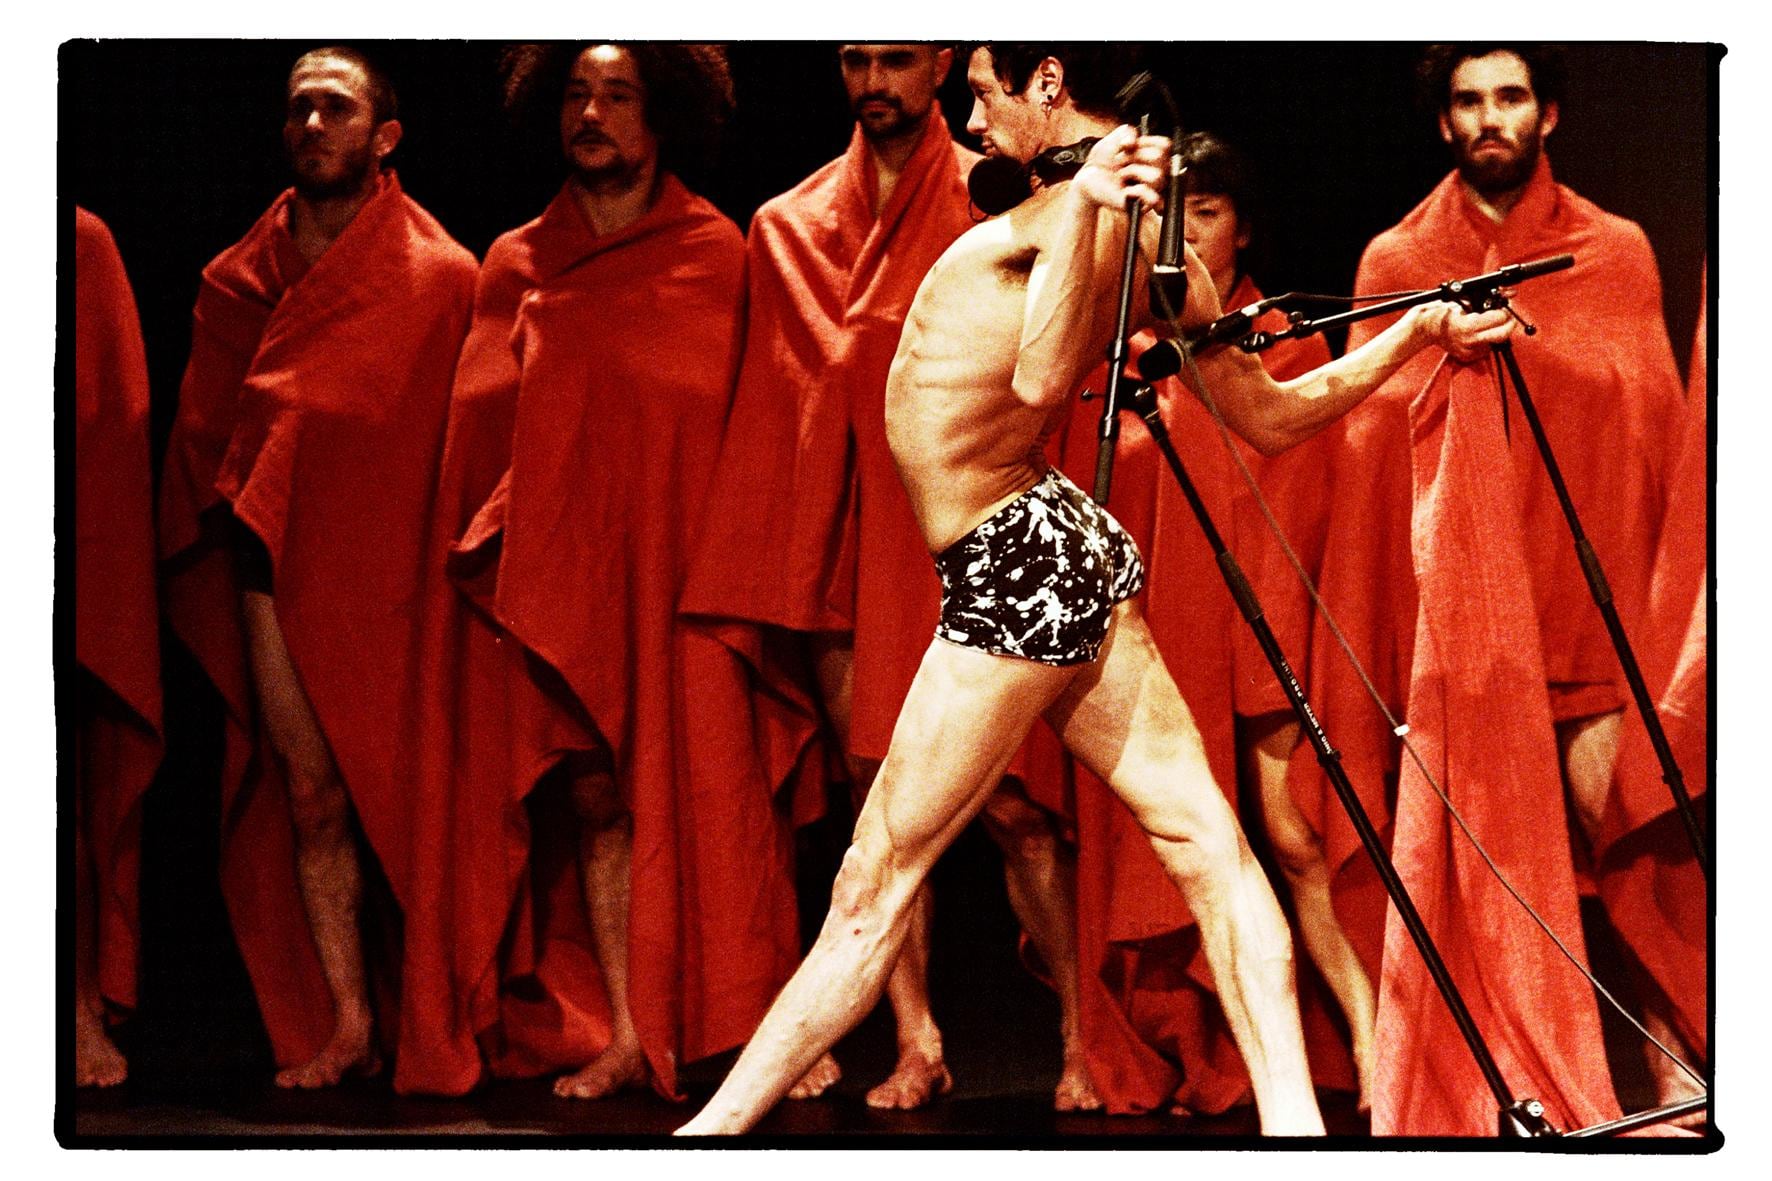 A dancer in underwear, back arched, holding microphones behind him. He stands in front of people draped in red.